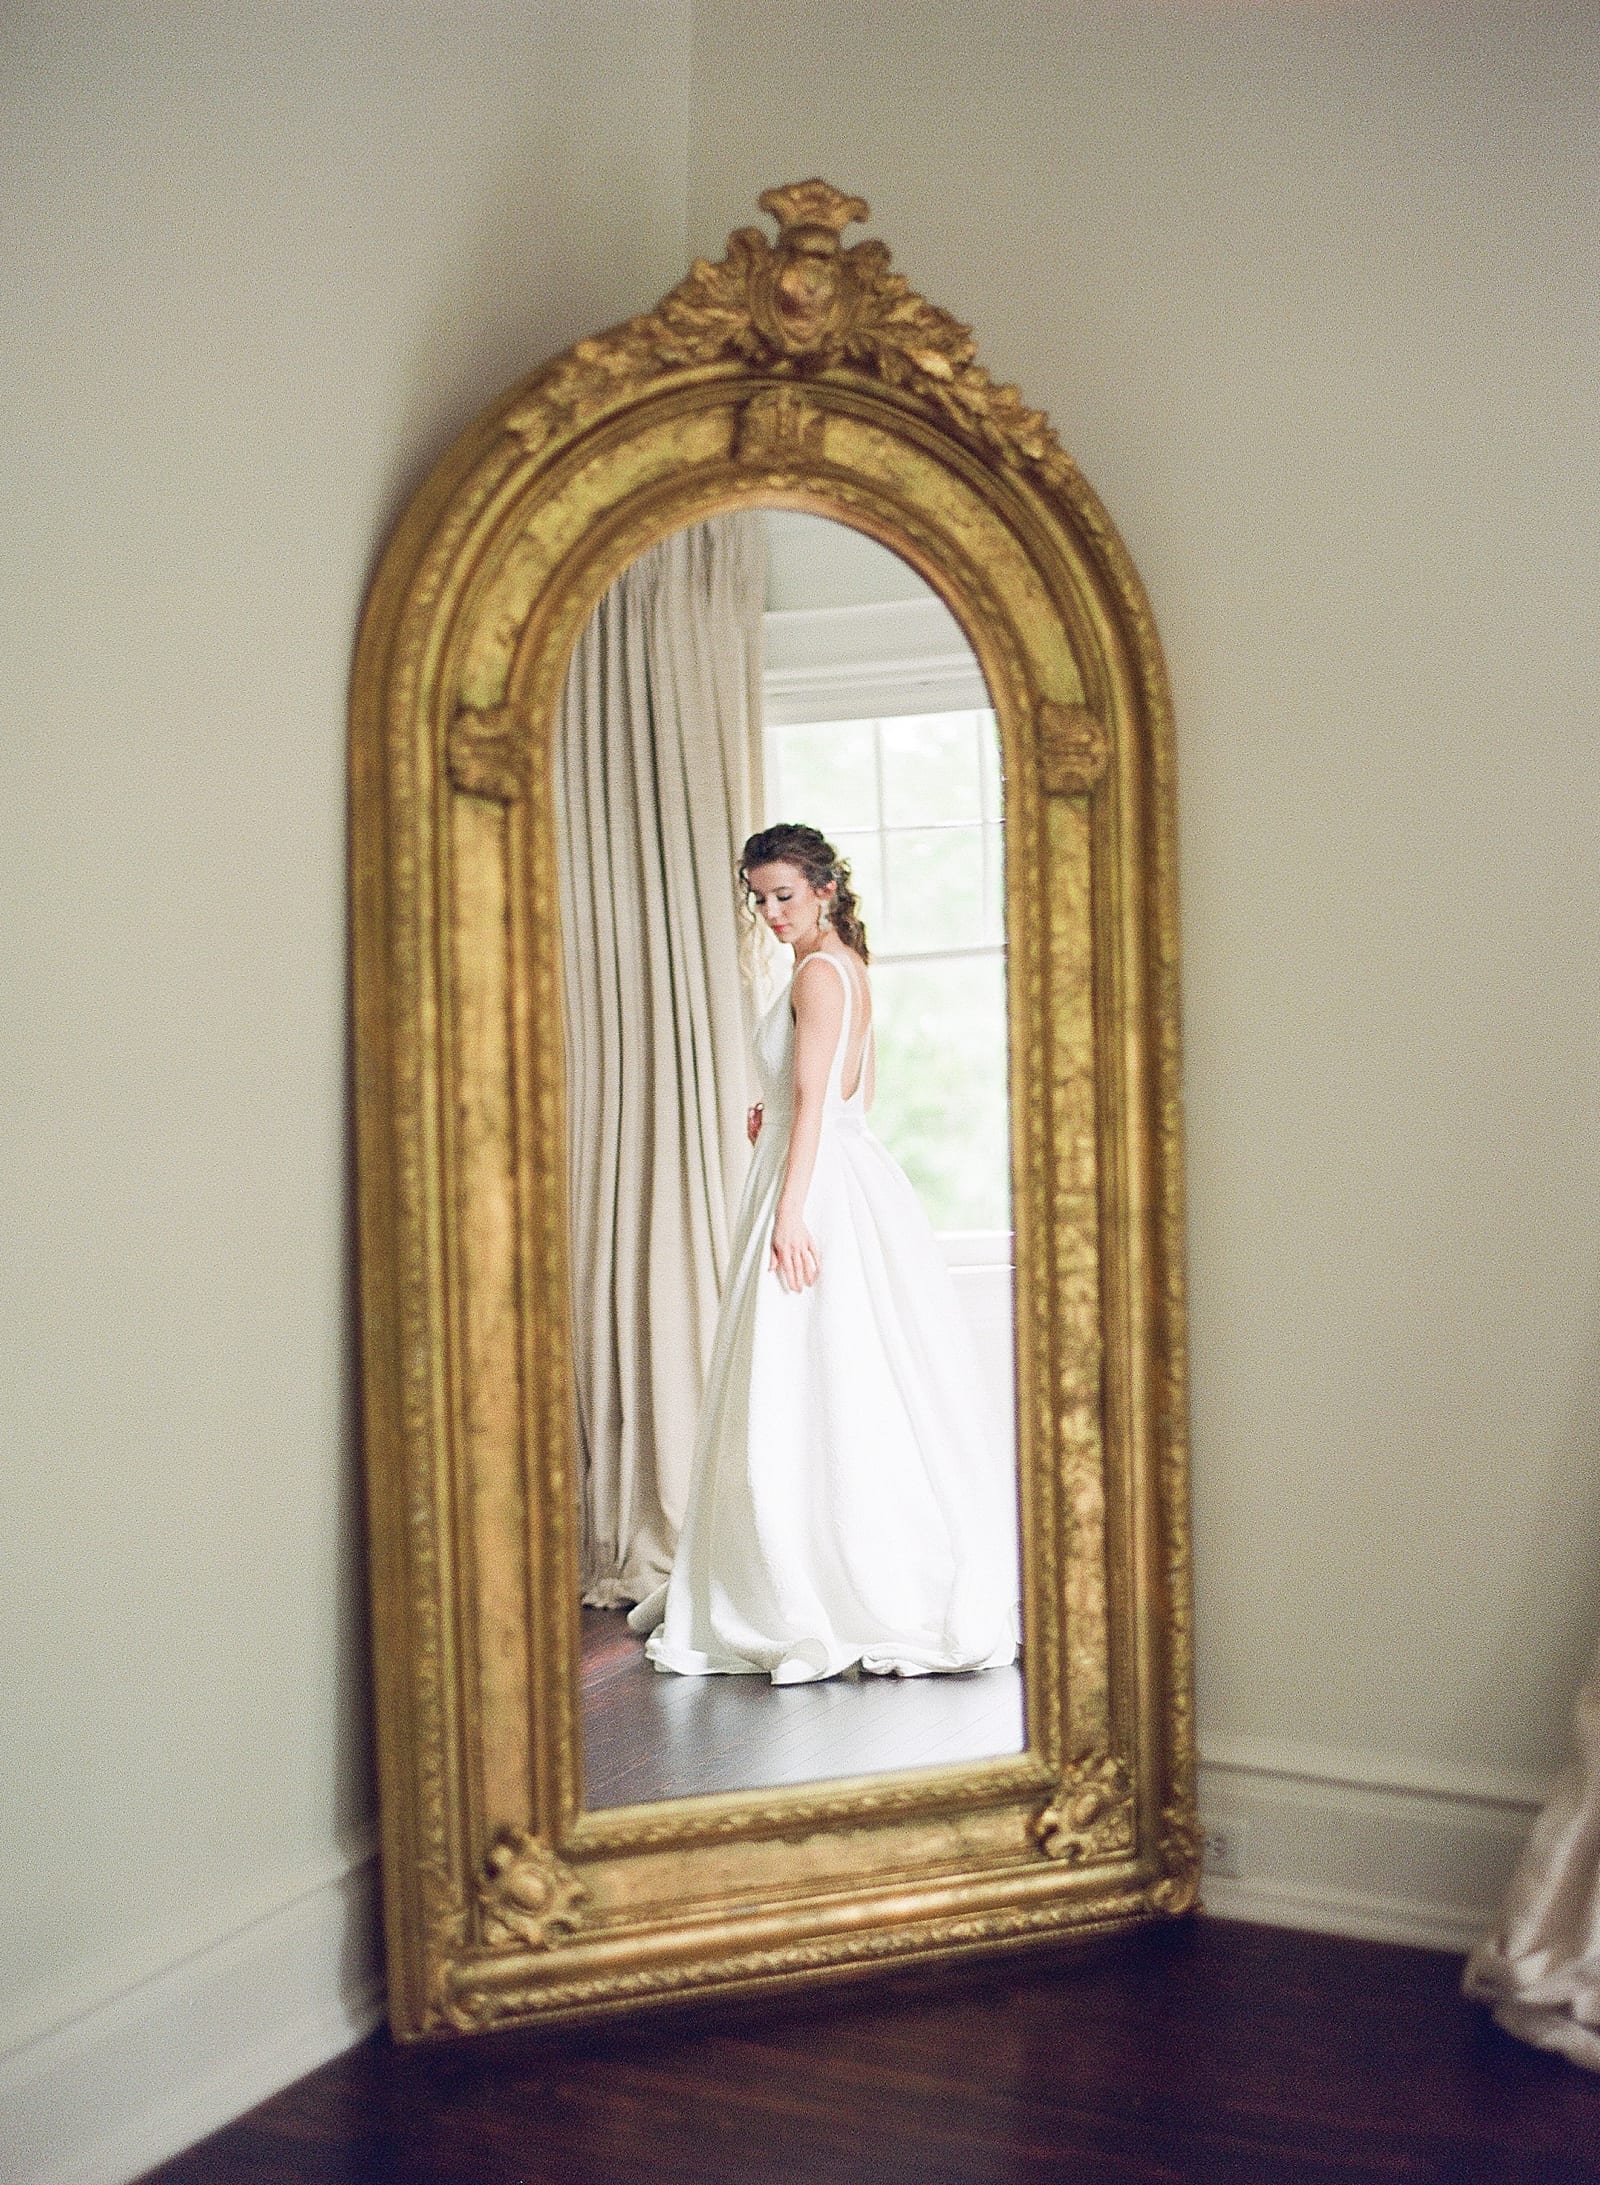 Bridal Portraits Bride Looking Down in Gold Mirror Photo